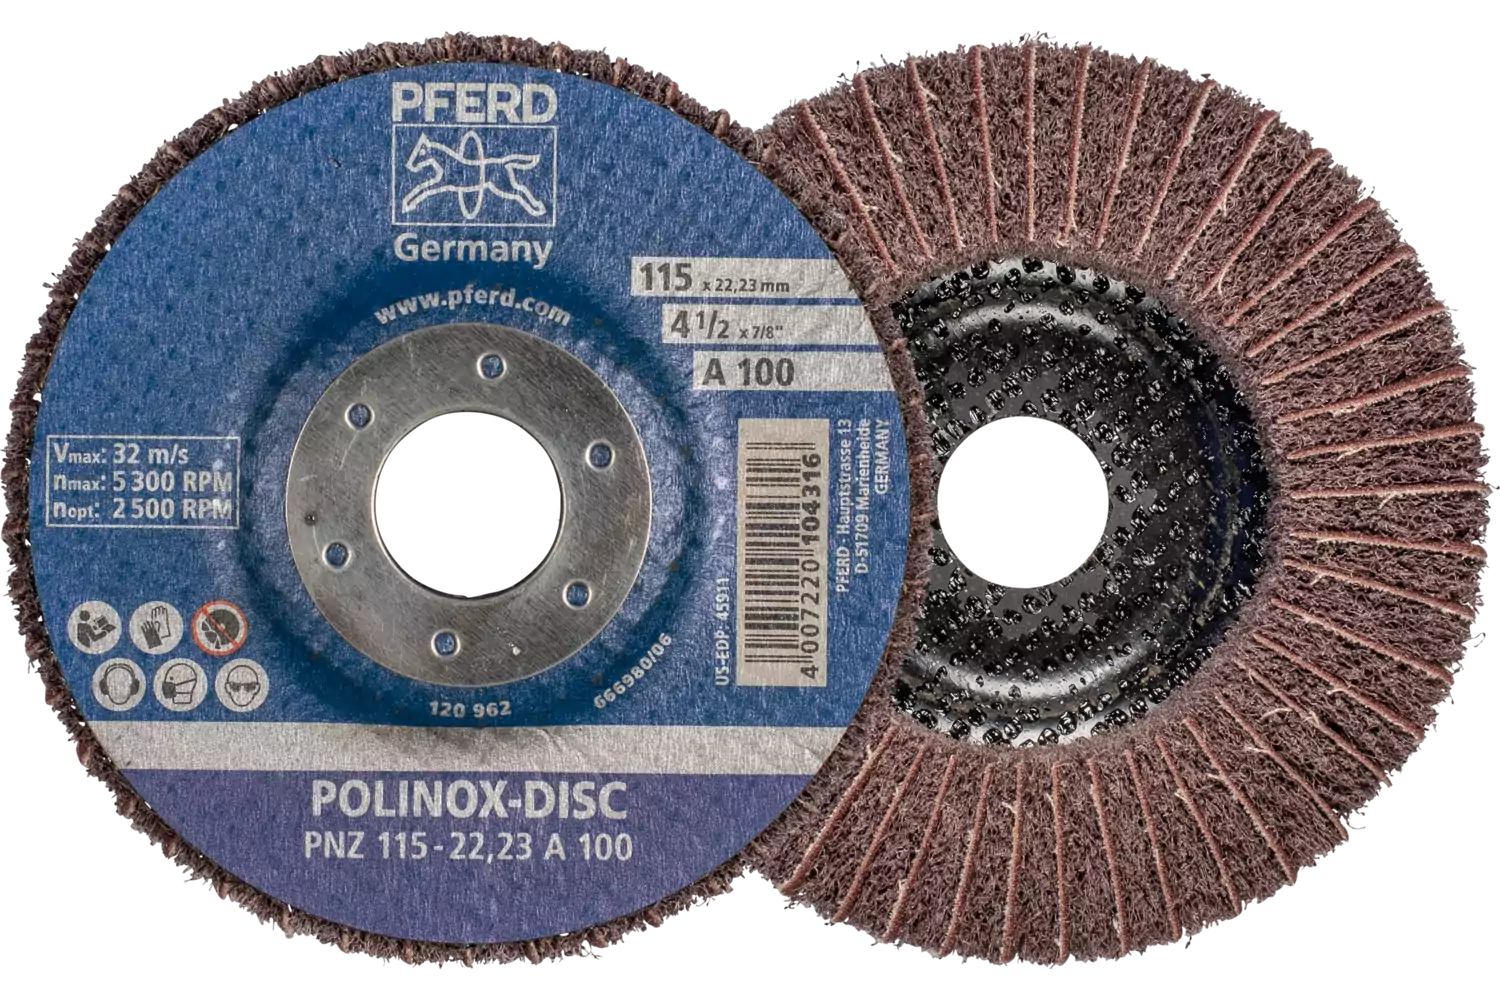 POLINOX non-woven fibre-backing disc PNZ dia. 115 mm centre hole dia. 22.23 mm A100 for fine grinding and finishing 1